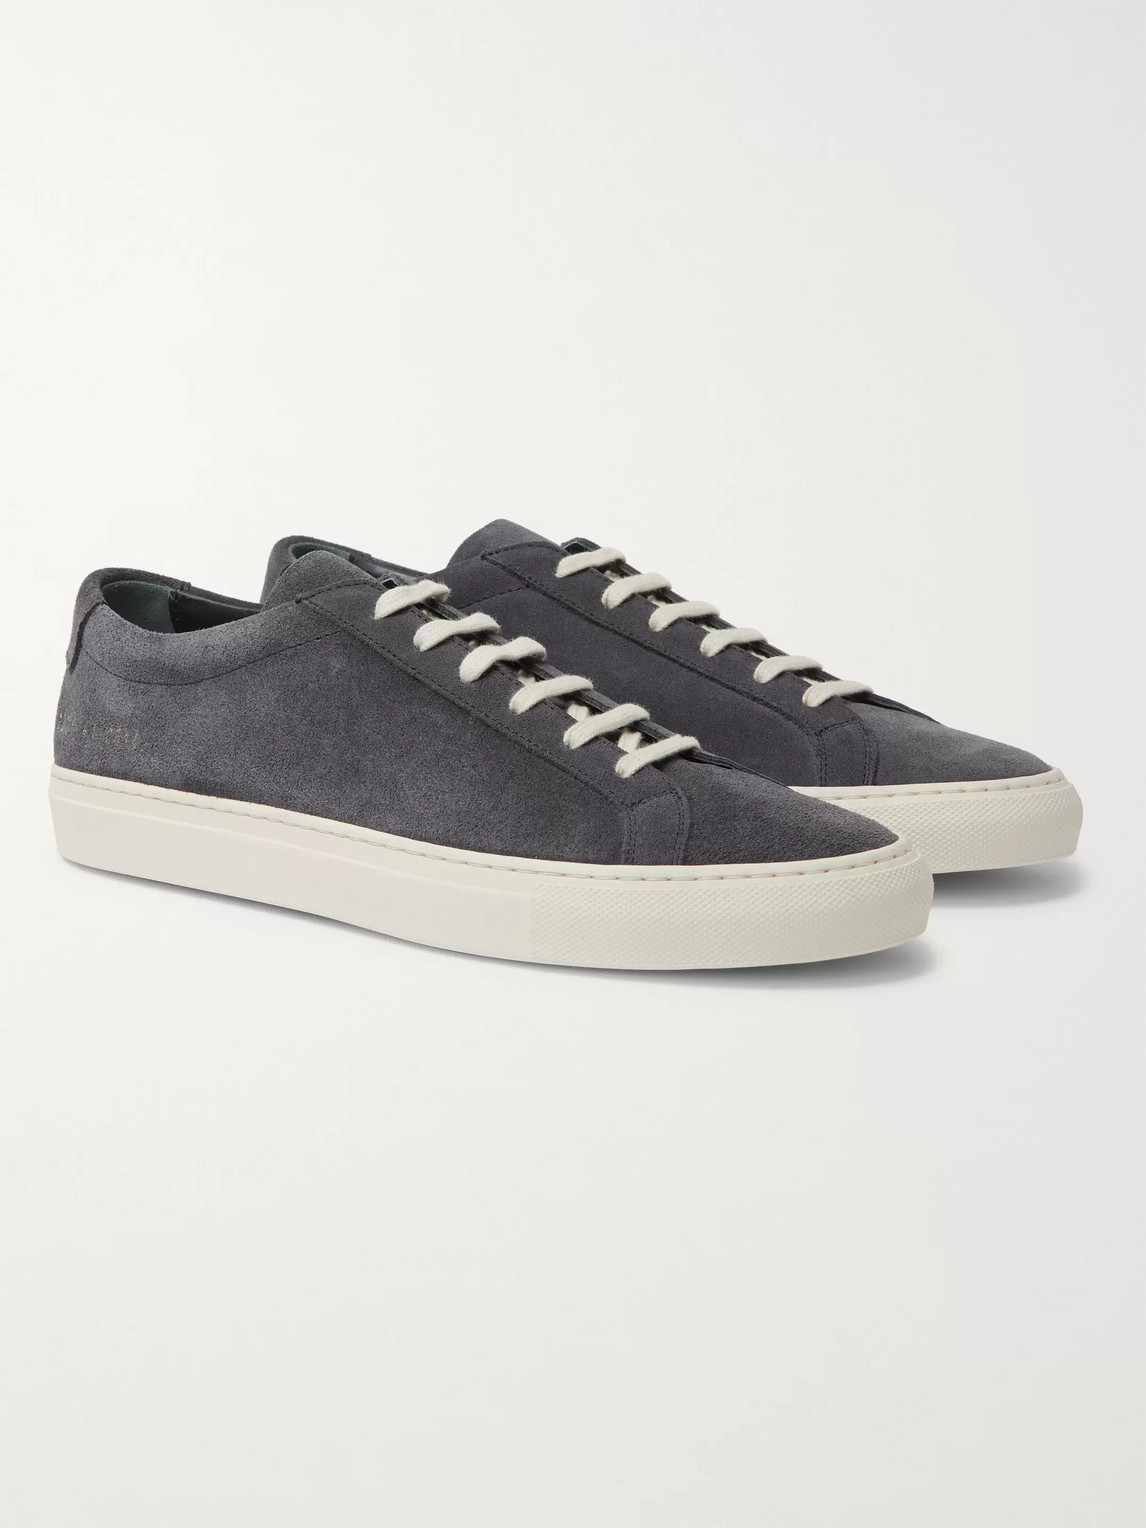 COMMON PROJECTS ACHILLES SUEDE SNEAKERS